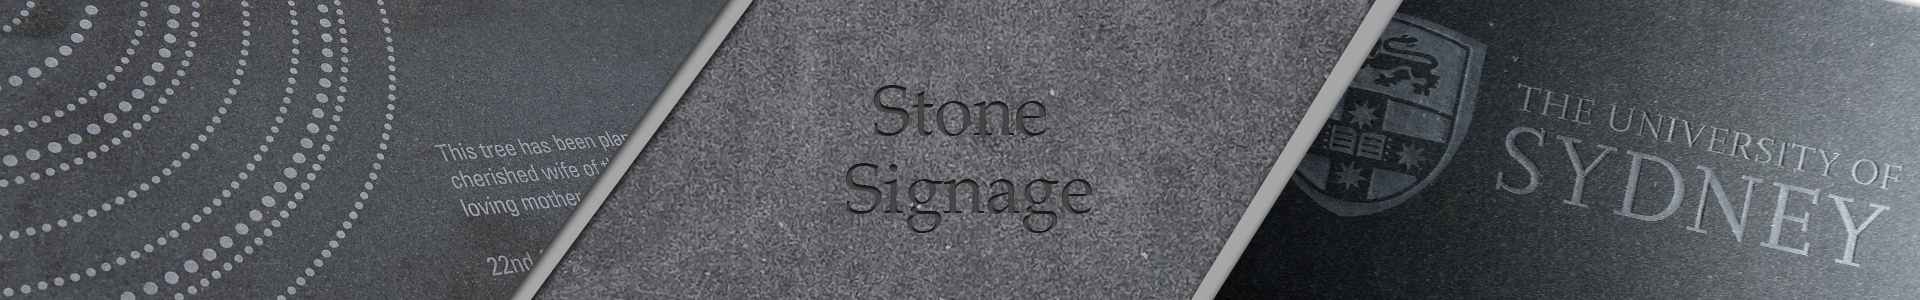 stone-signage-engraving-banner.png